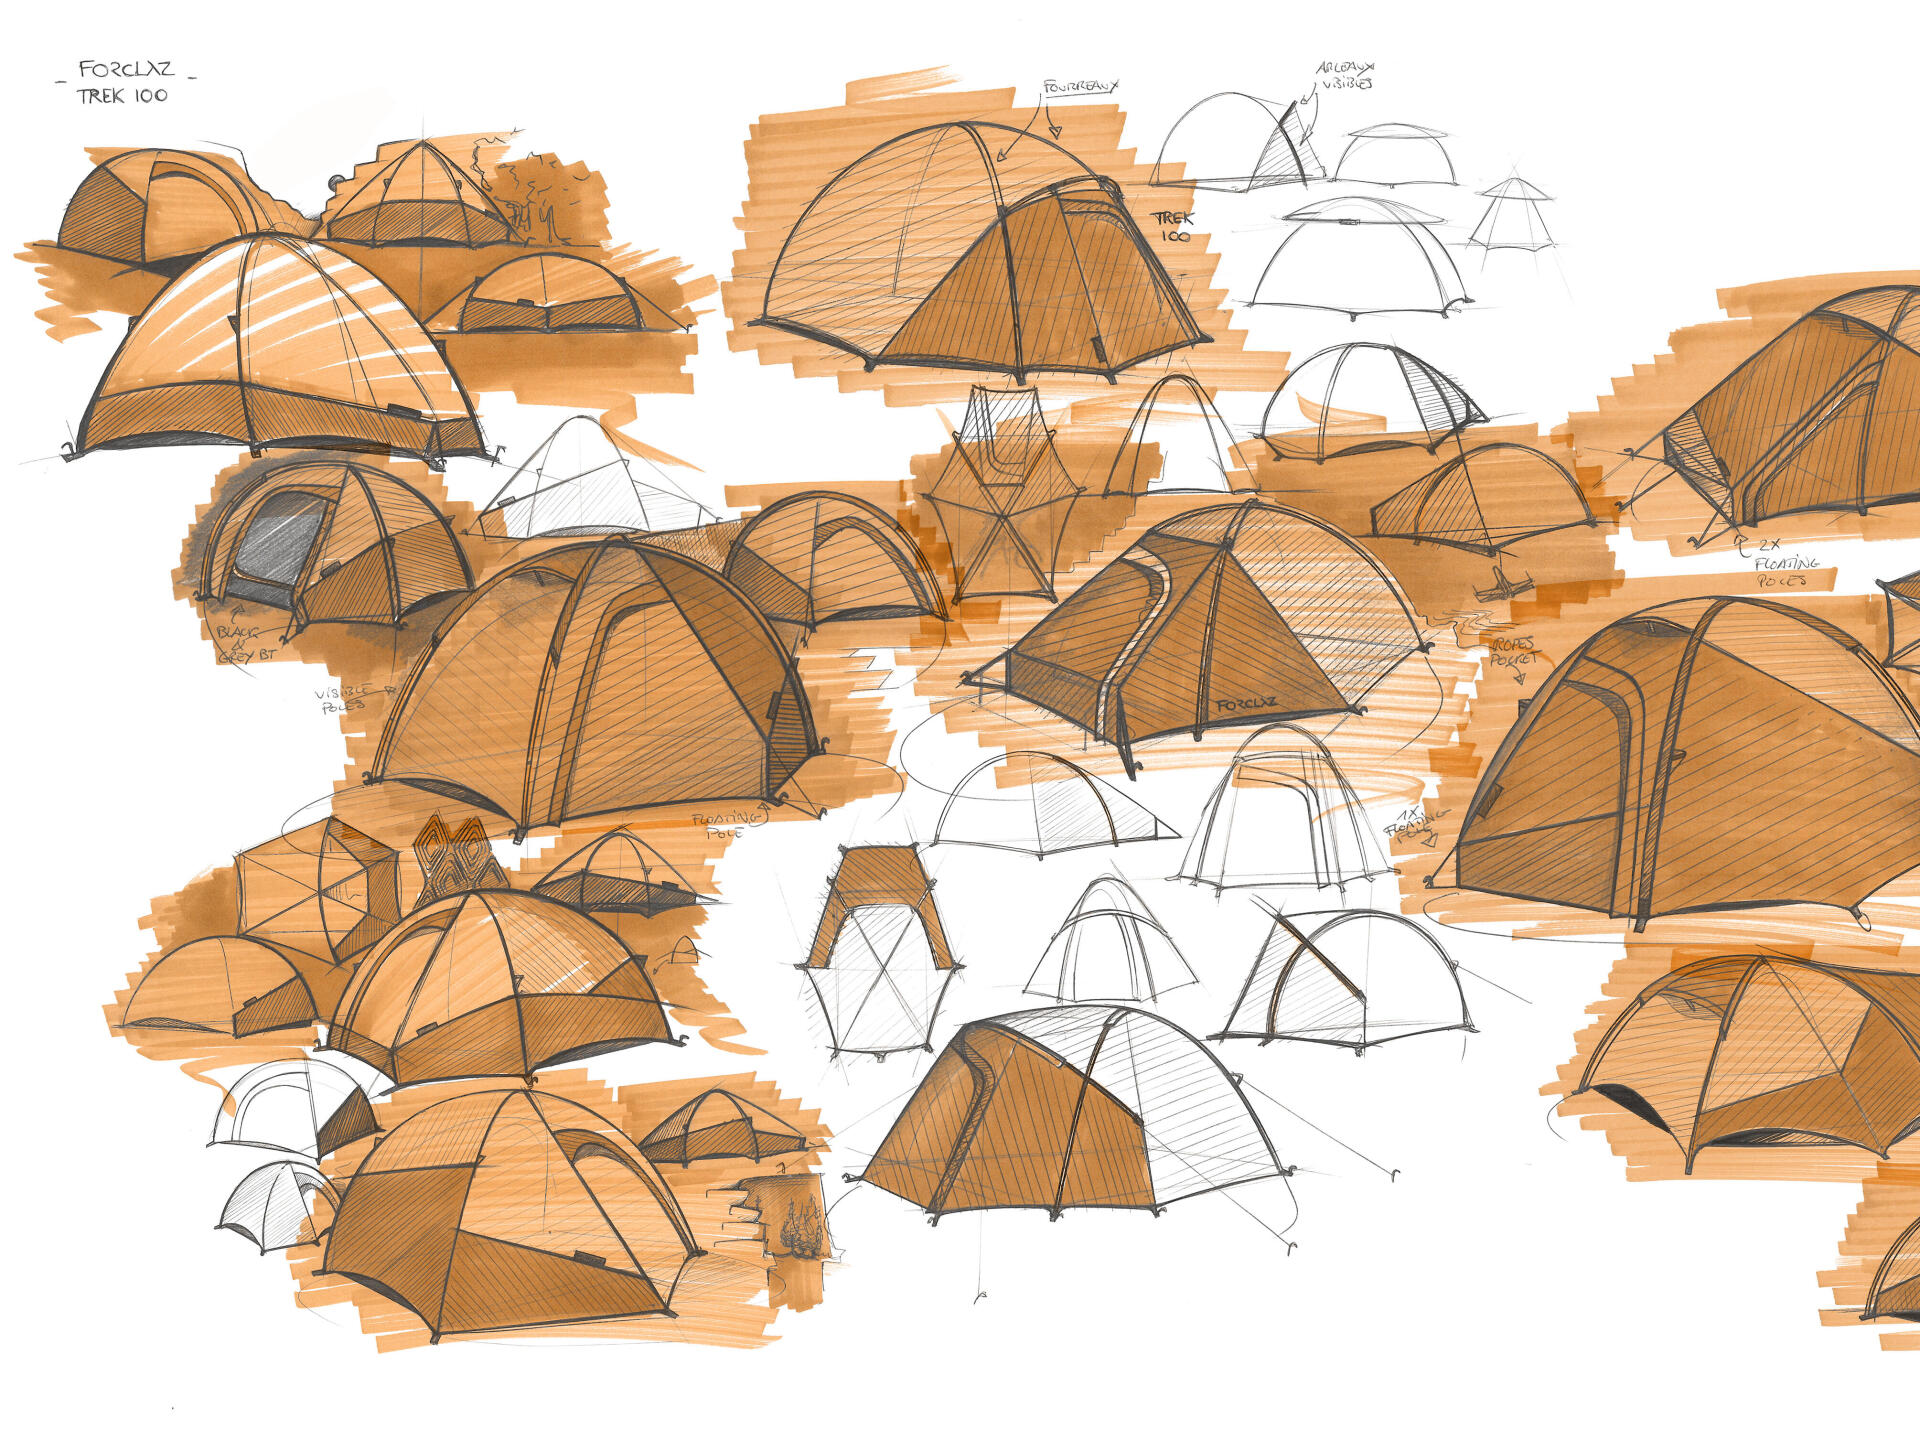 $Research drawing for a trekking tent